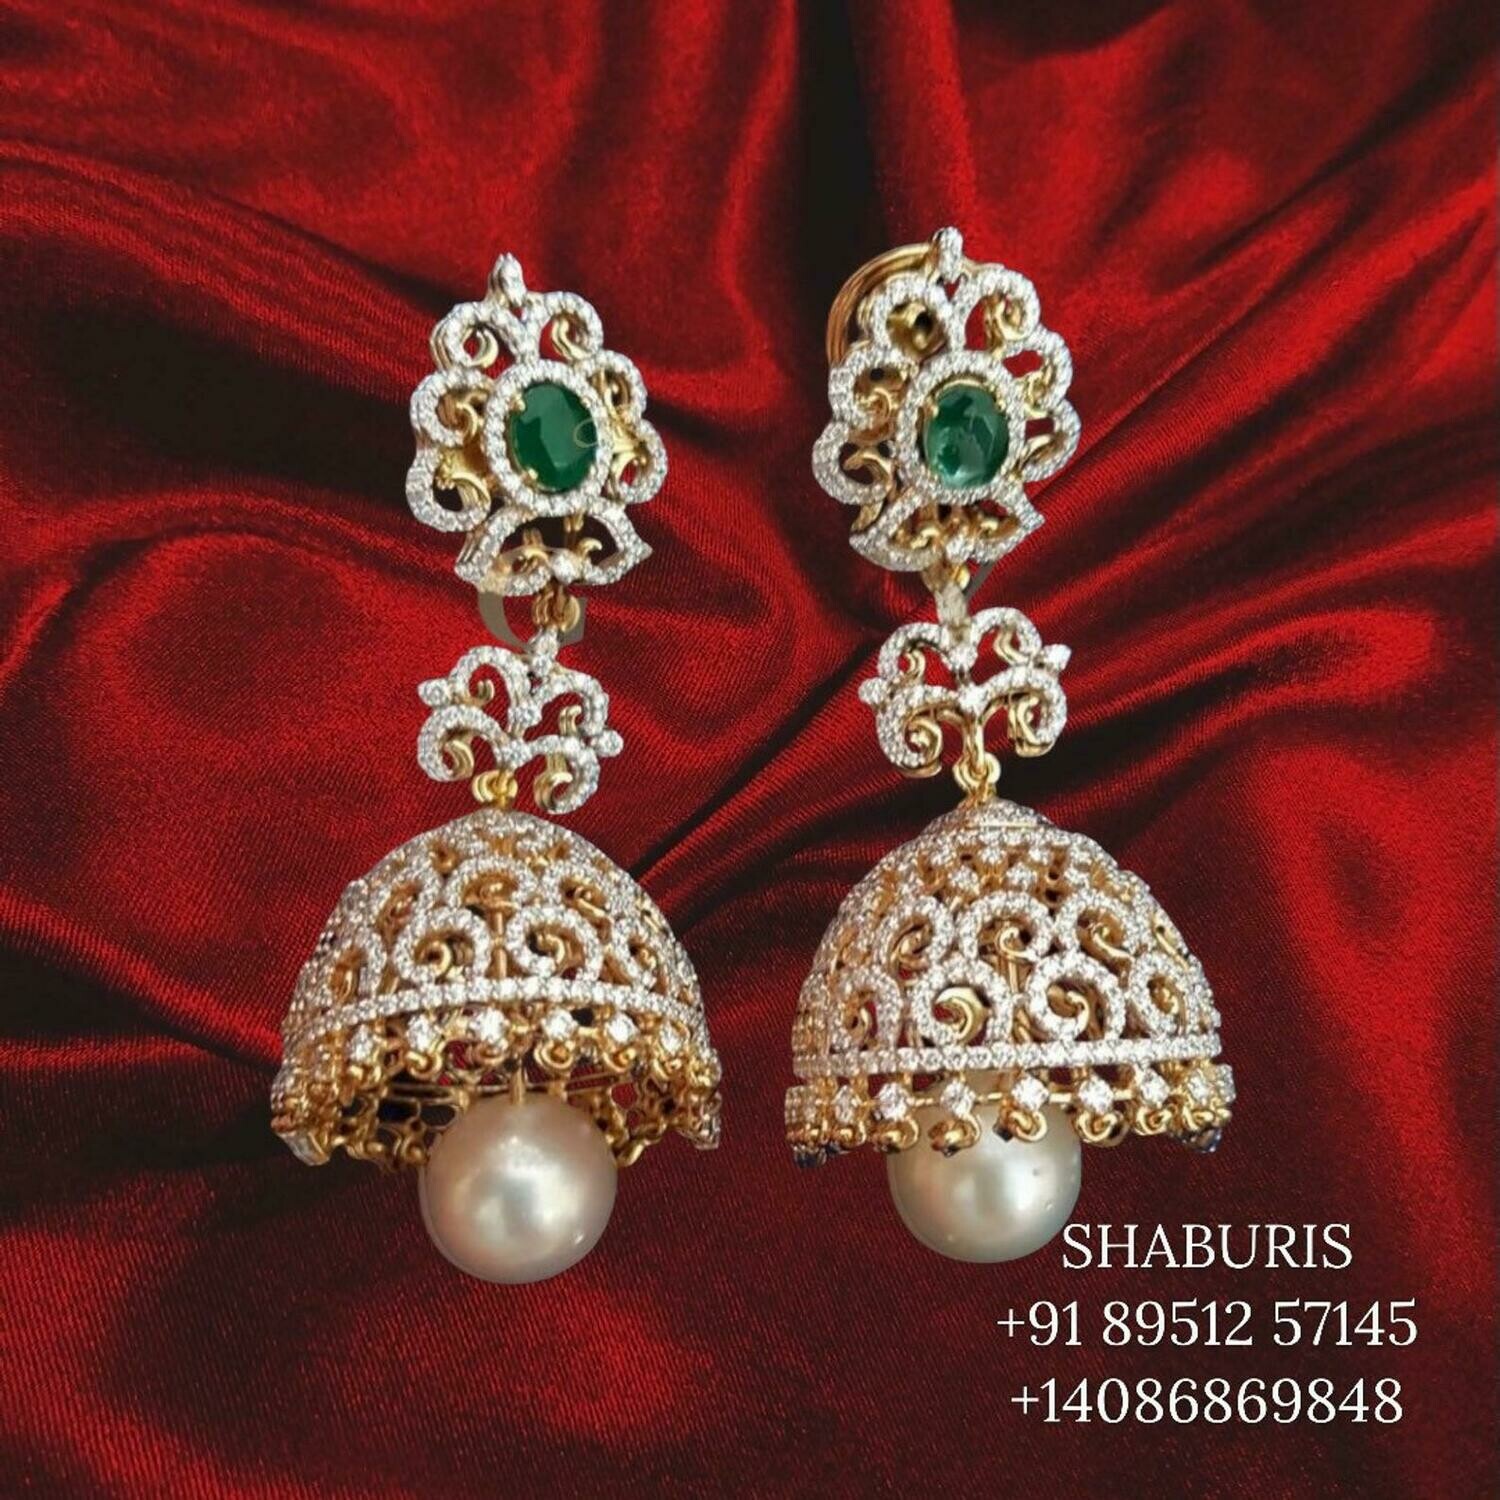 Diamond earrings pure silver jewelry cocktail jewelry indian gold jewelry designs emerald jewelry sets diamond jewelry sets - SHABURIS